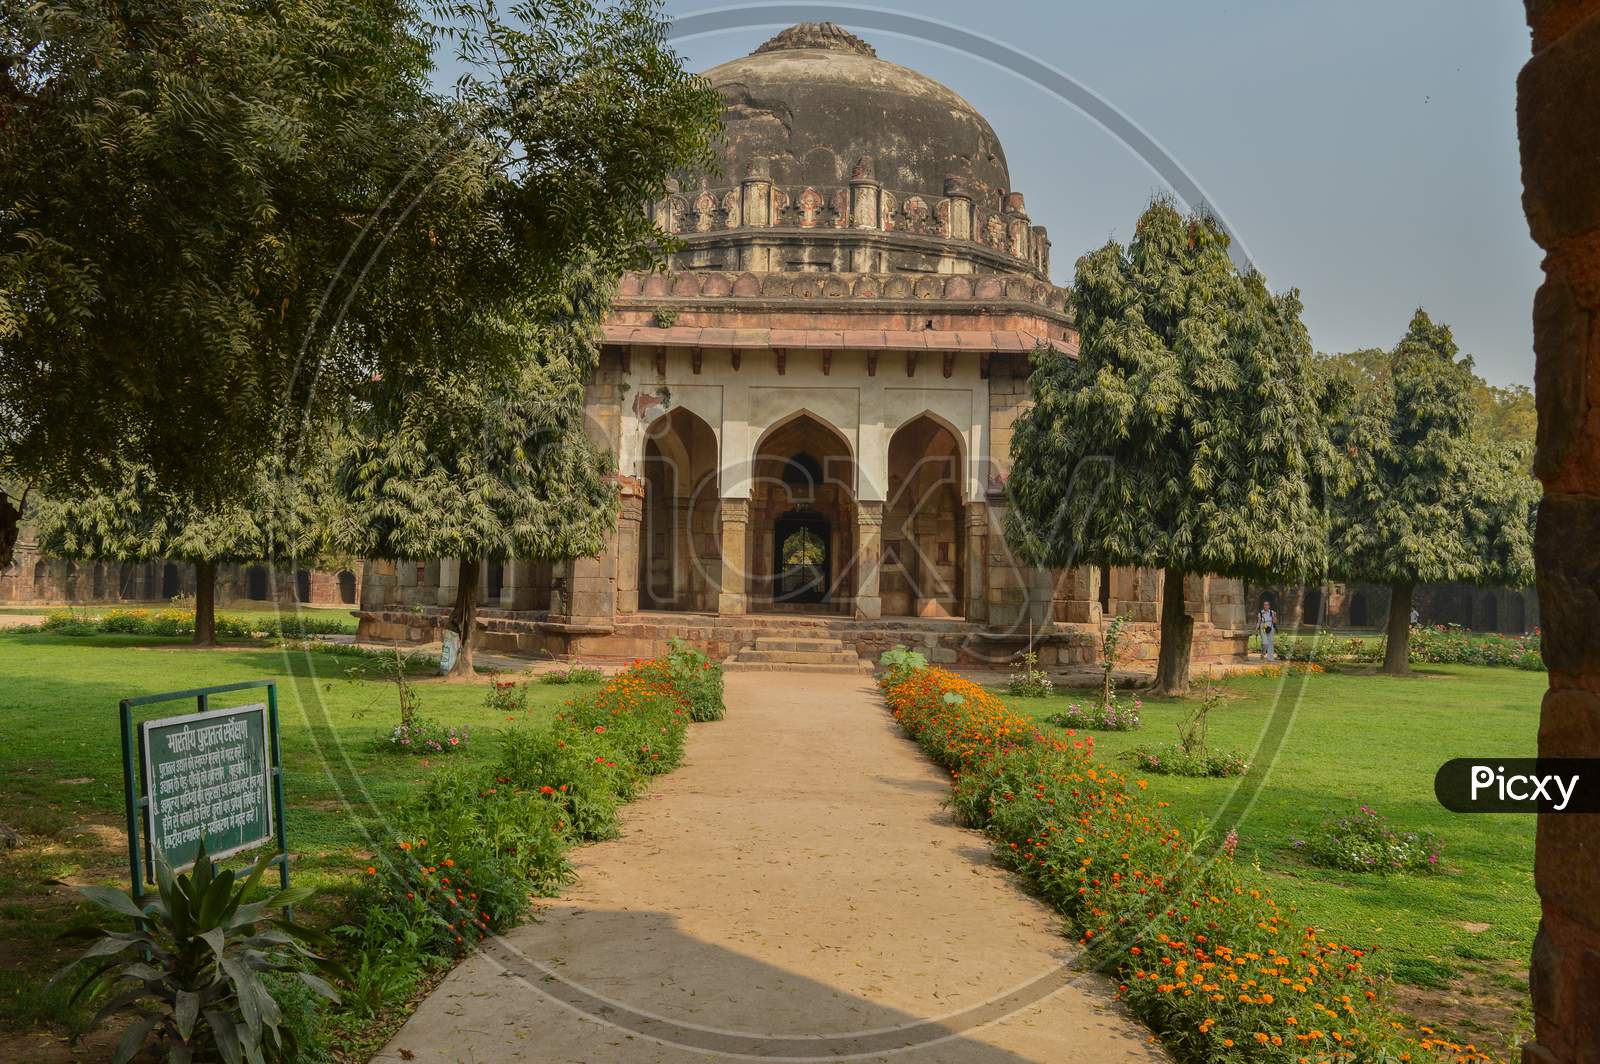 A Tomb Of Sikandar Lodhi Monument At Lodi Garden Or Lodhi Gardens In A City Park From The Side Of The Lawn At Winter Foggy Morning.